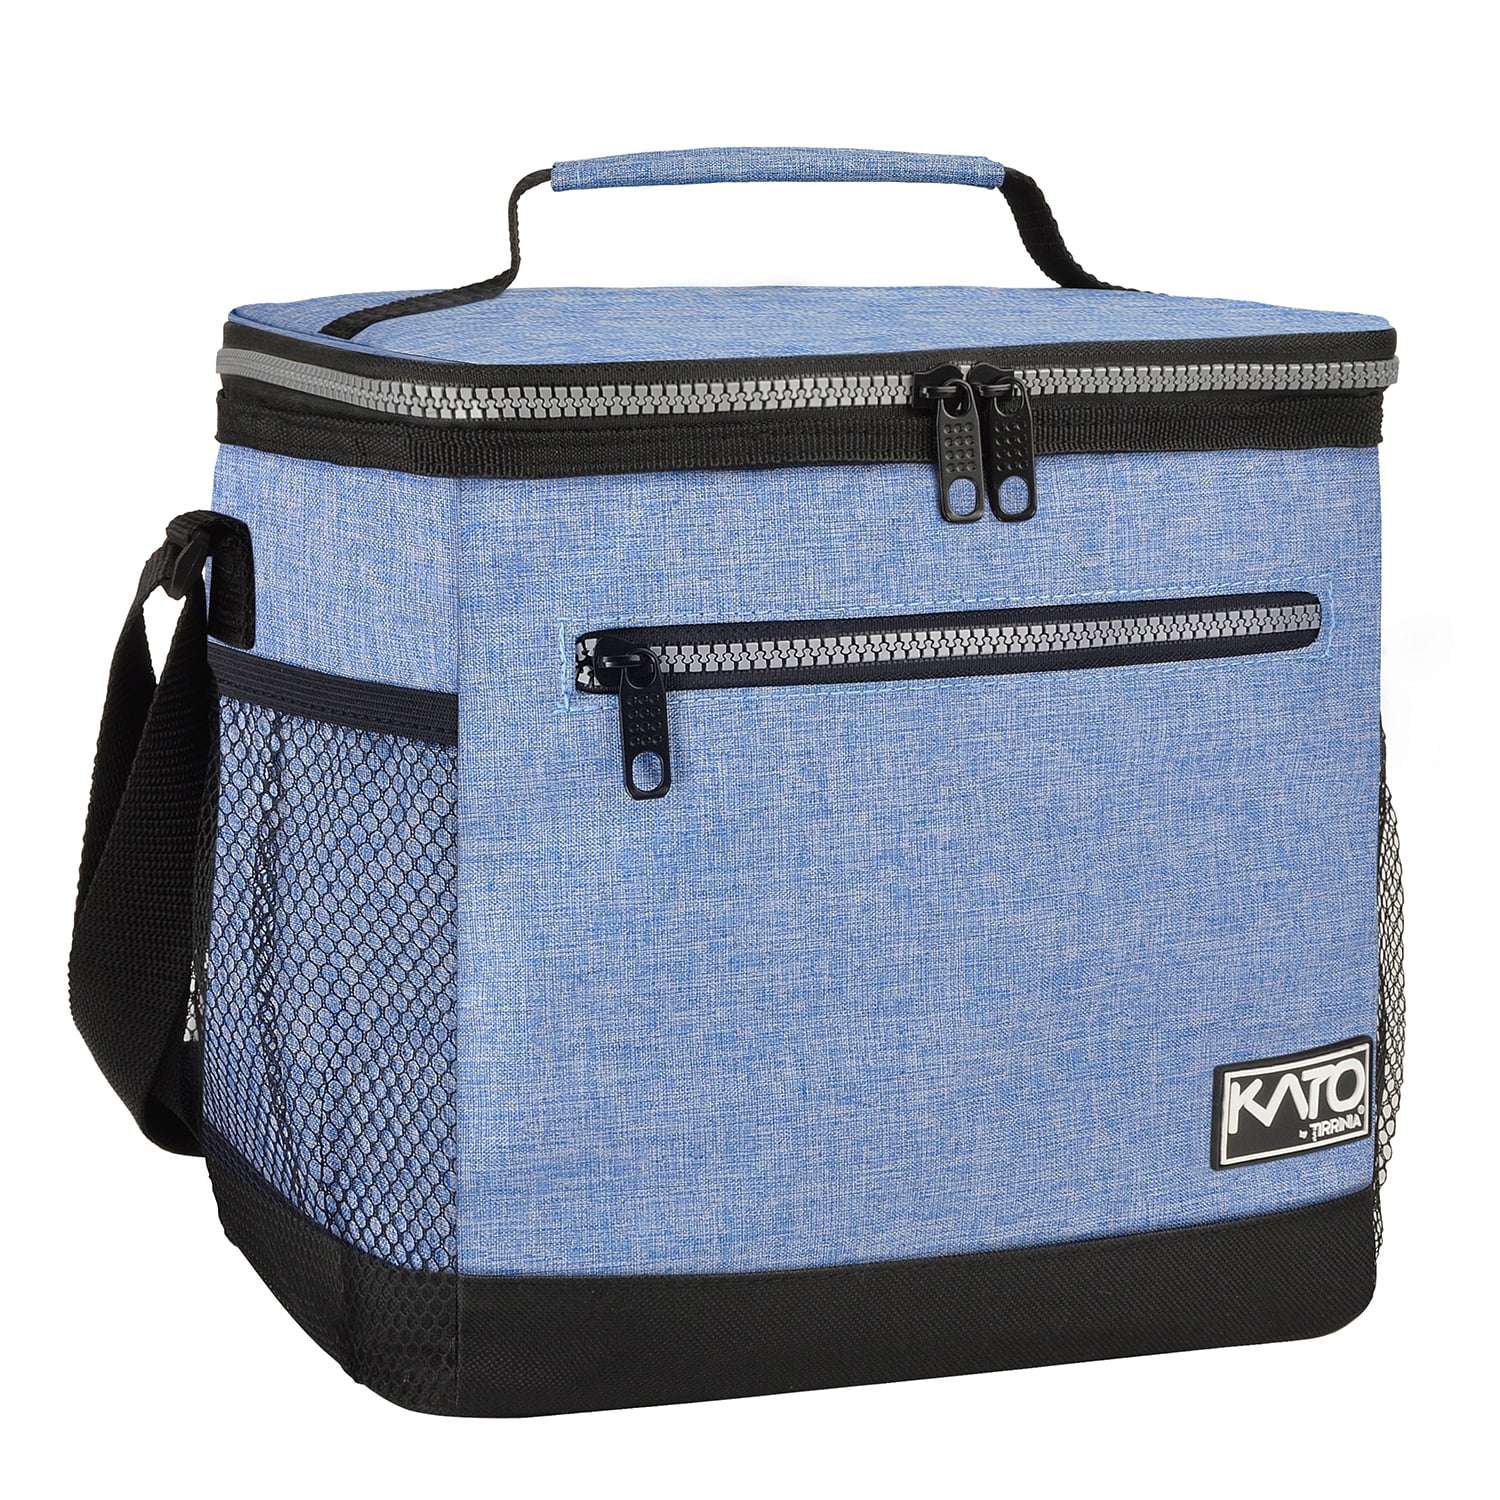 Can you keep warm in a cooler or an insulated lunch bag? – Healthy